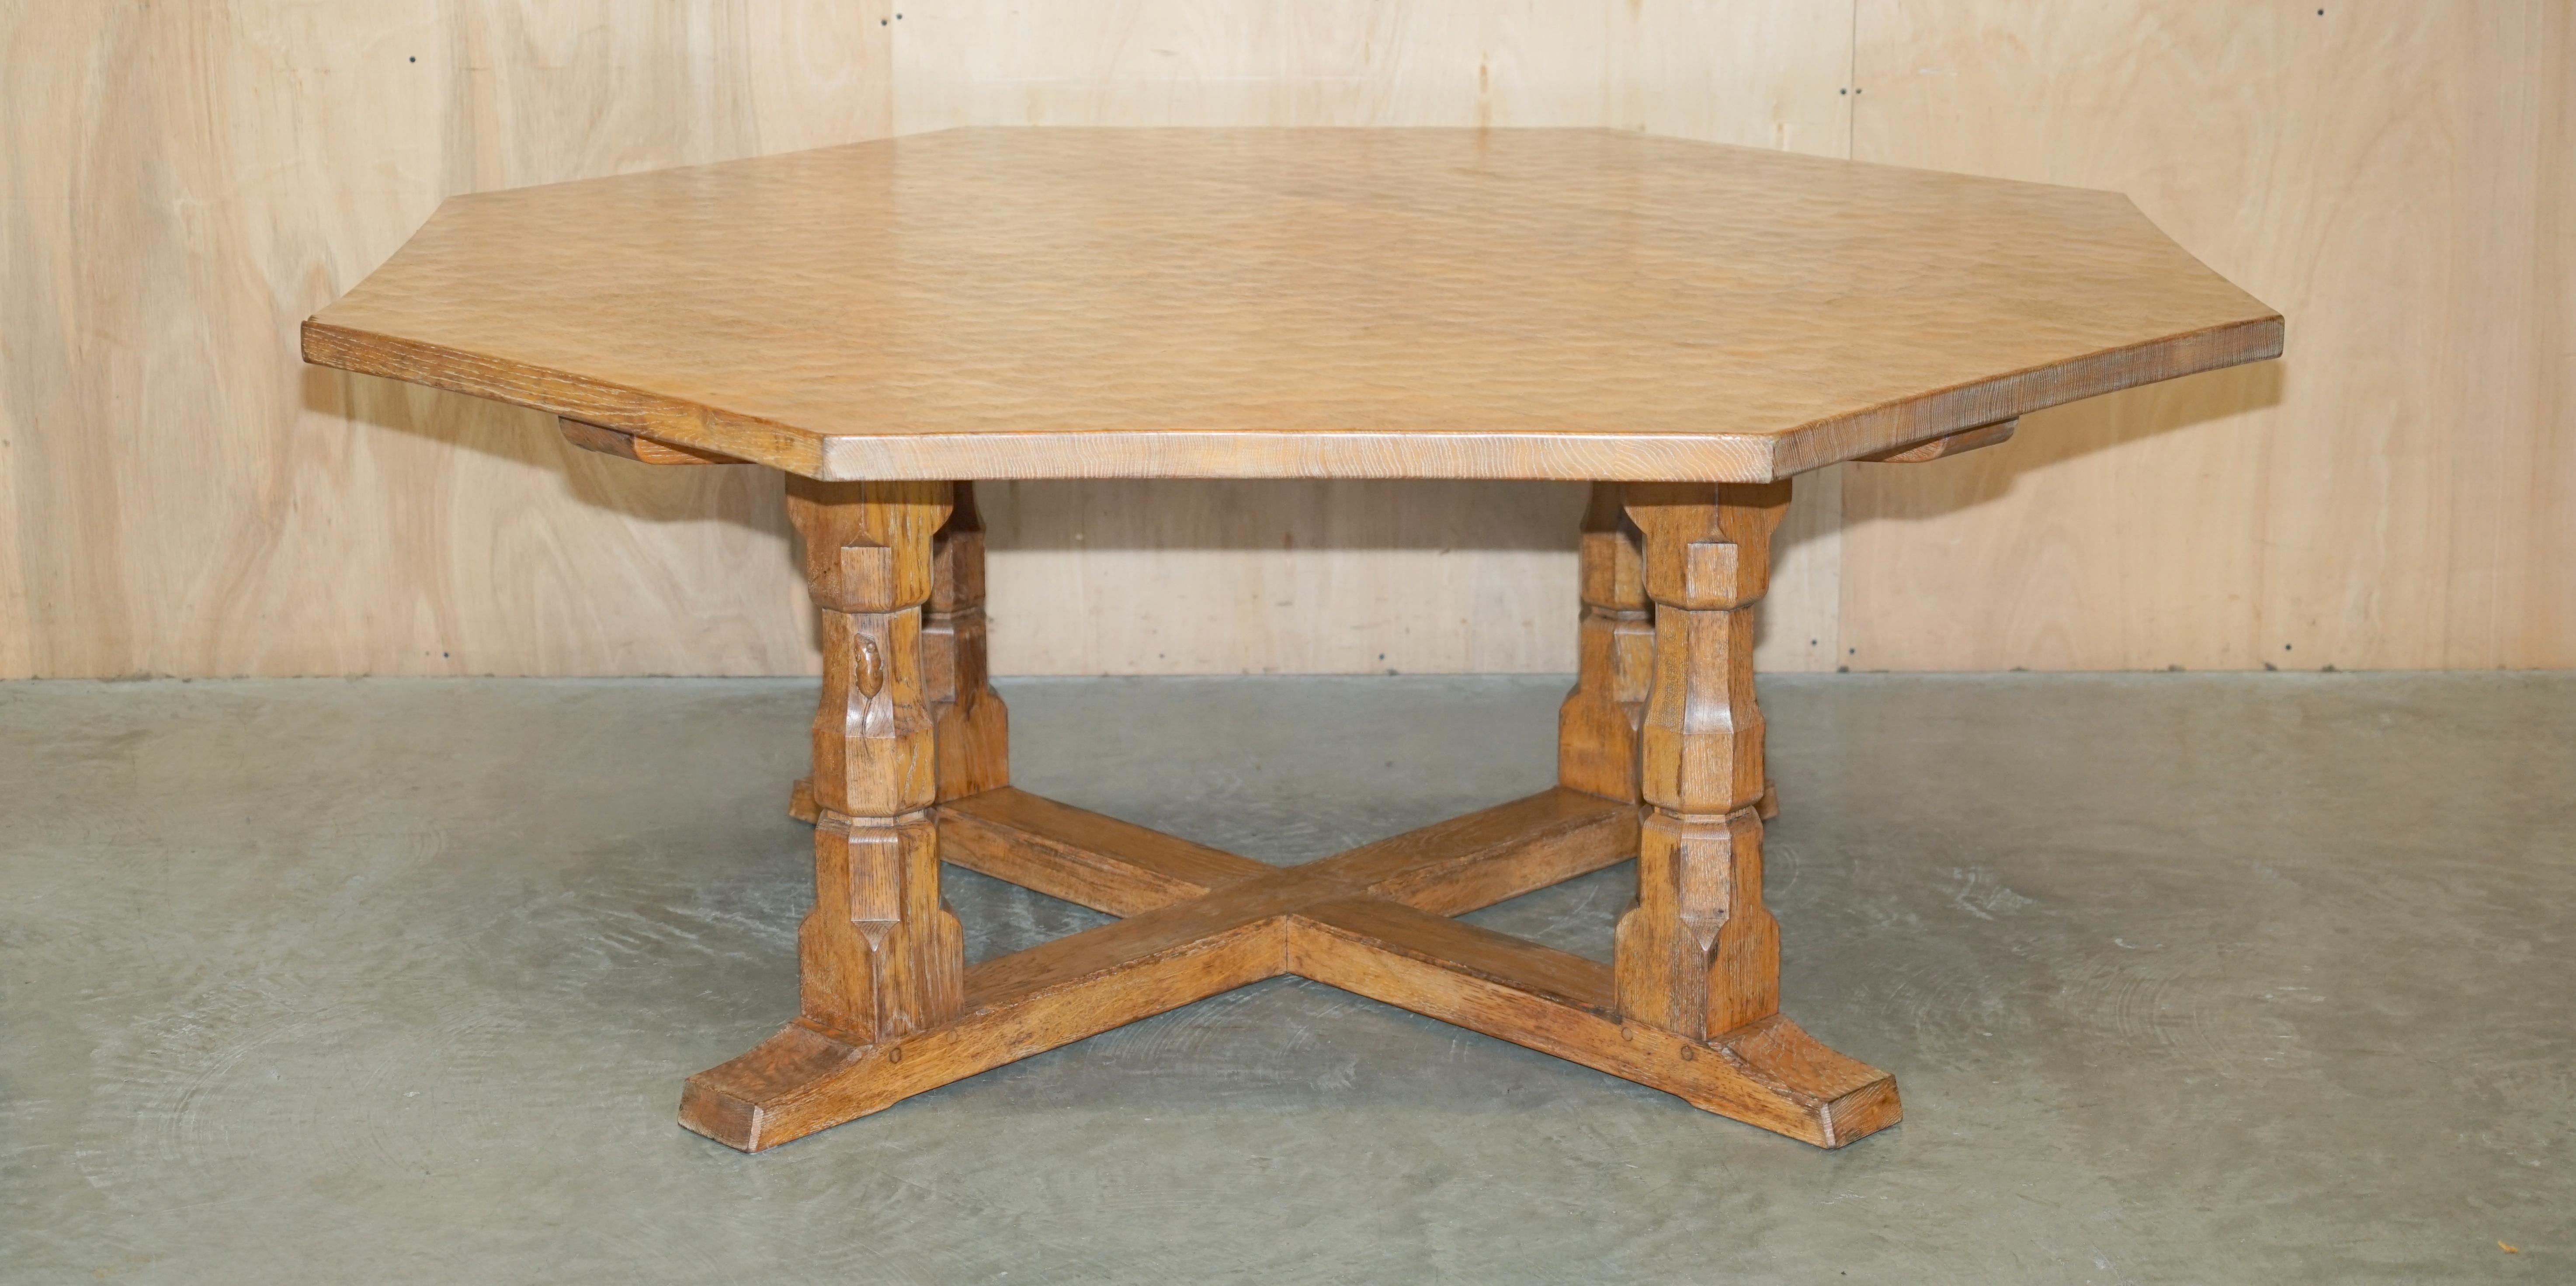 Royal House Antiques

Royal House Antiques is delighted to offer for sale this very collectable, huge, circa 1950's Robert Mouseman Thompson English oak Octagonal Adzed dining table with sublime patination

Please note the delivery fee listed is